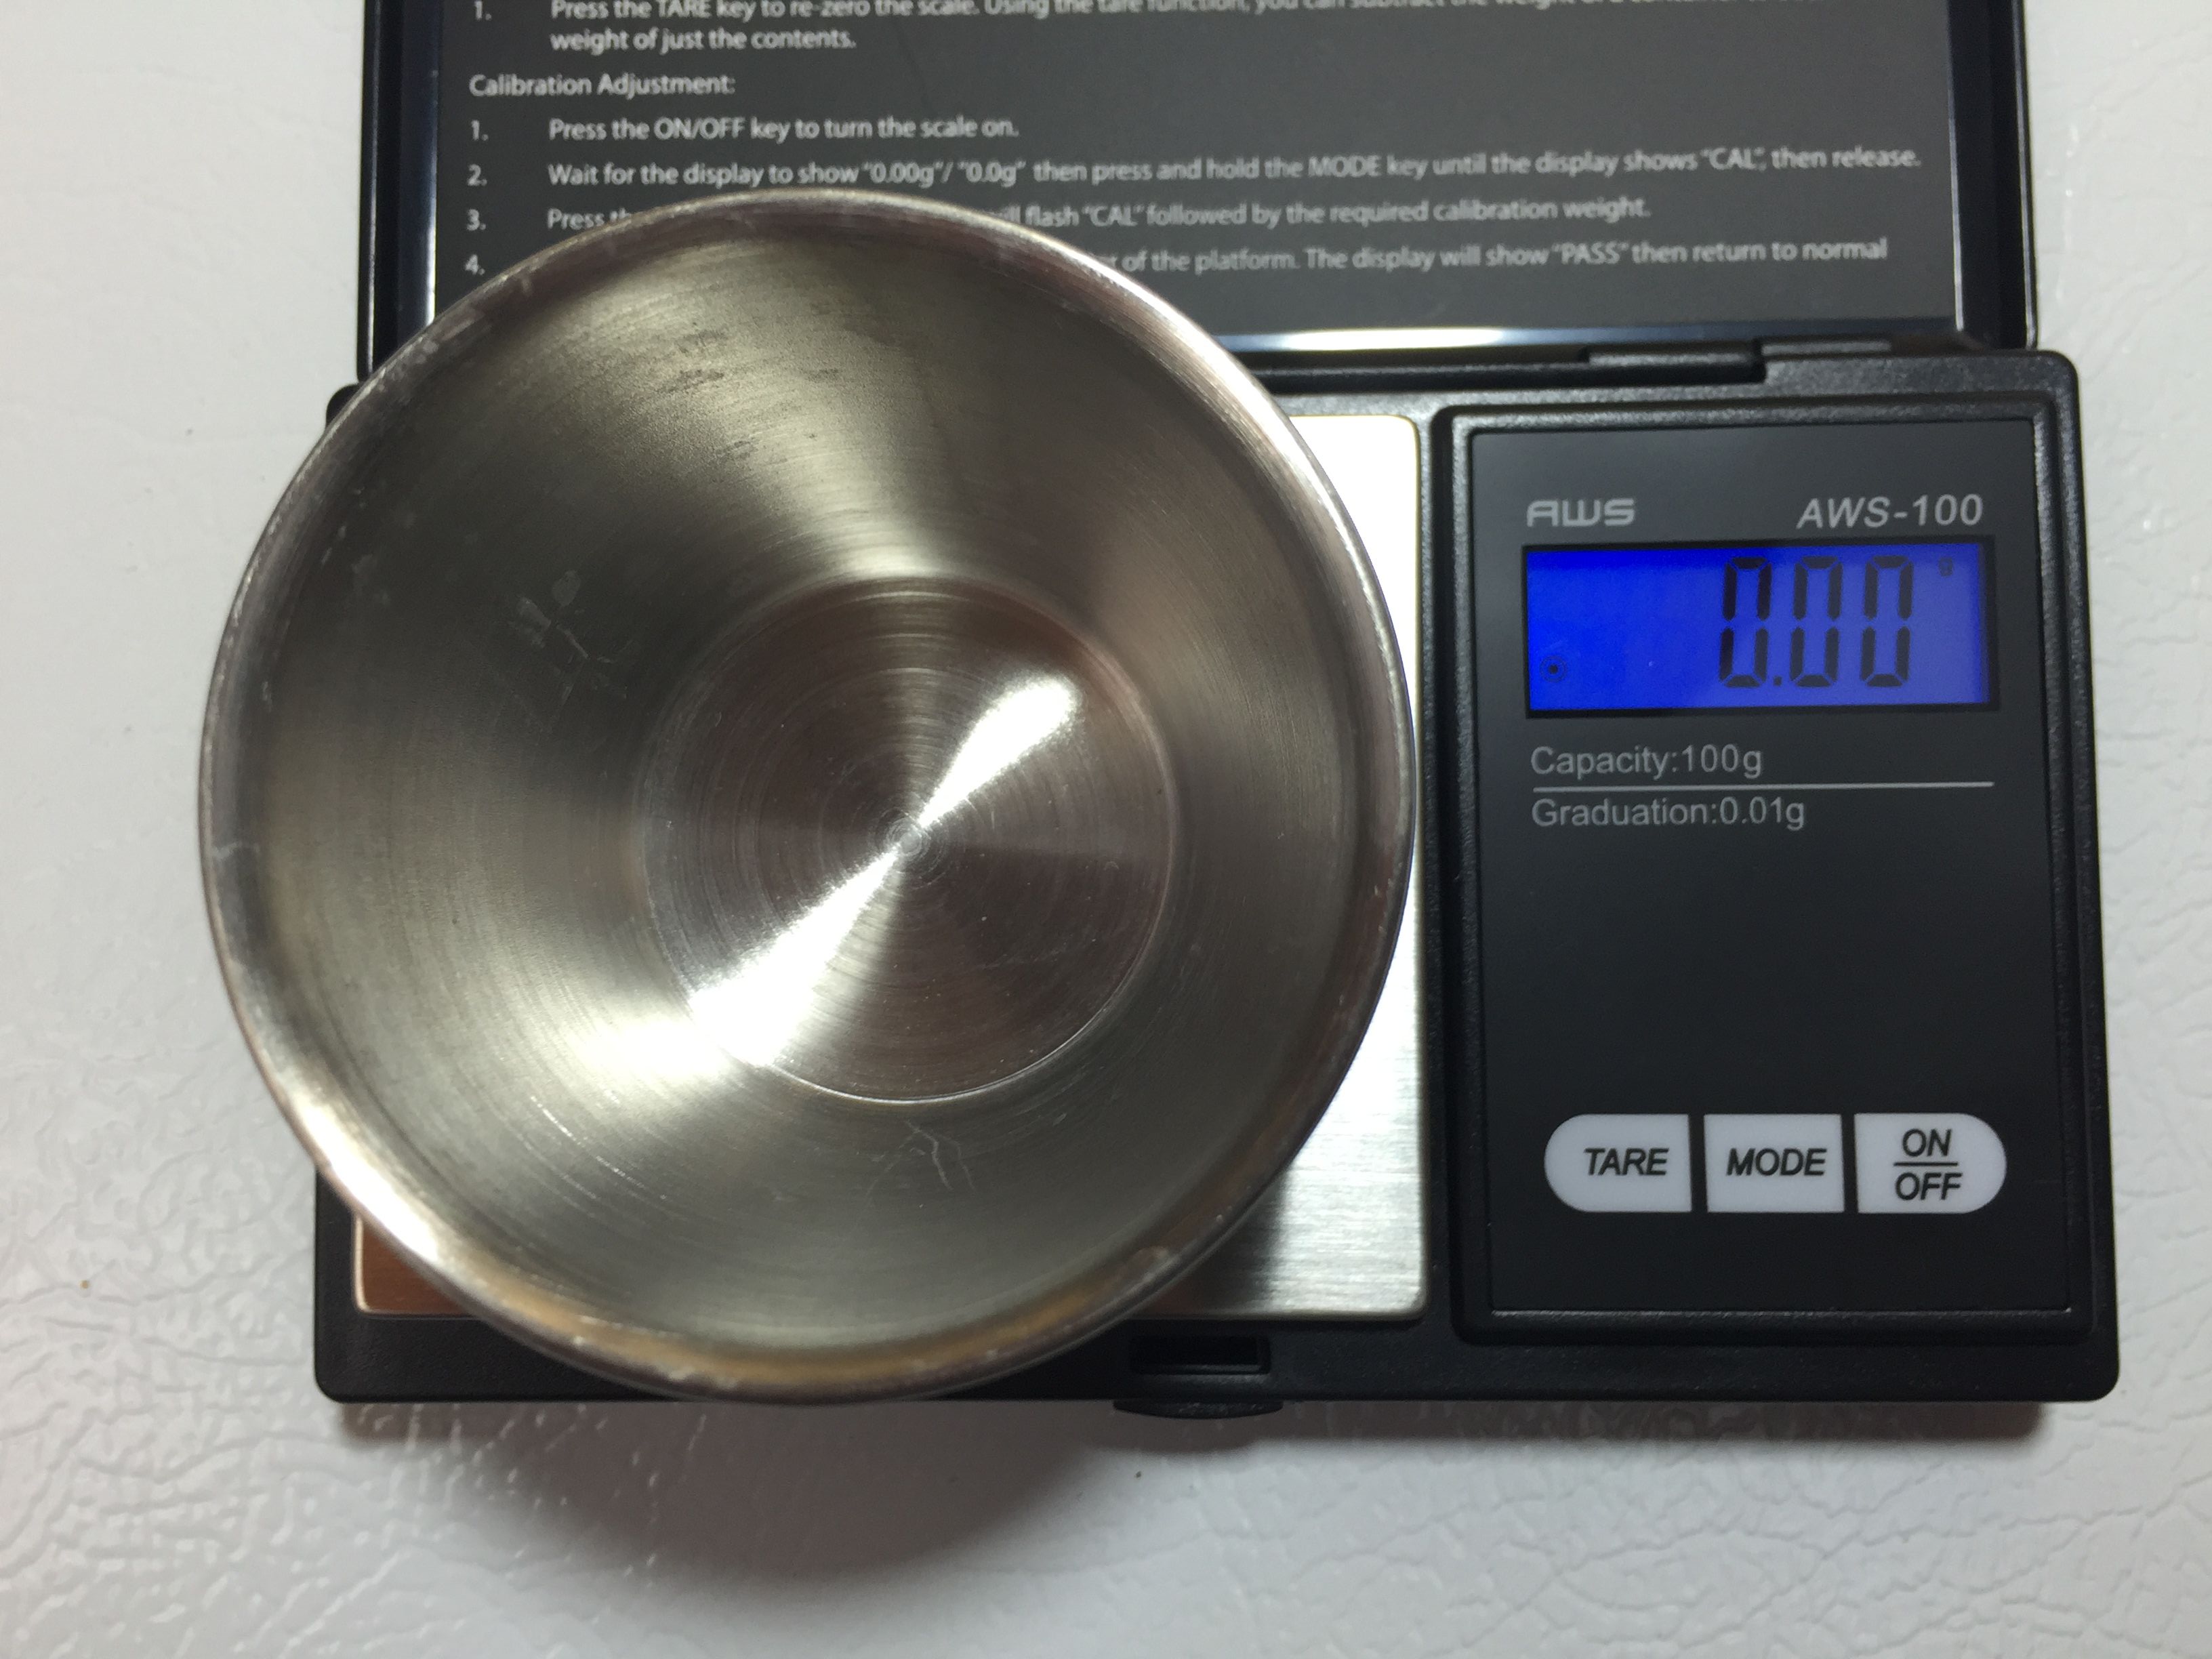 A picture of a scale with a bowl on it that's been tared